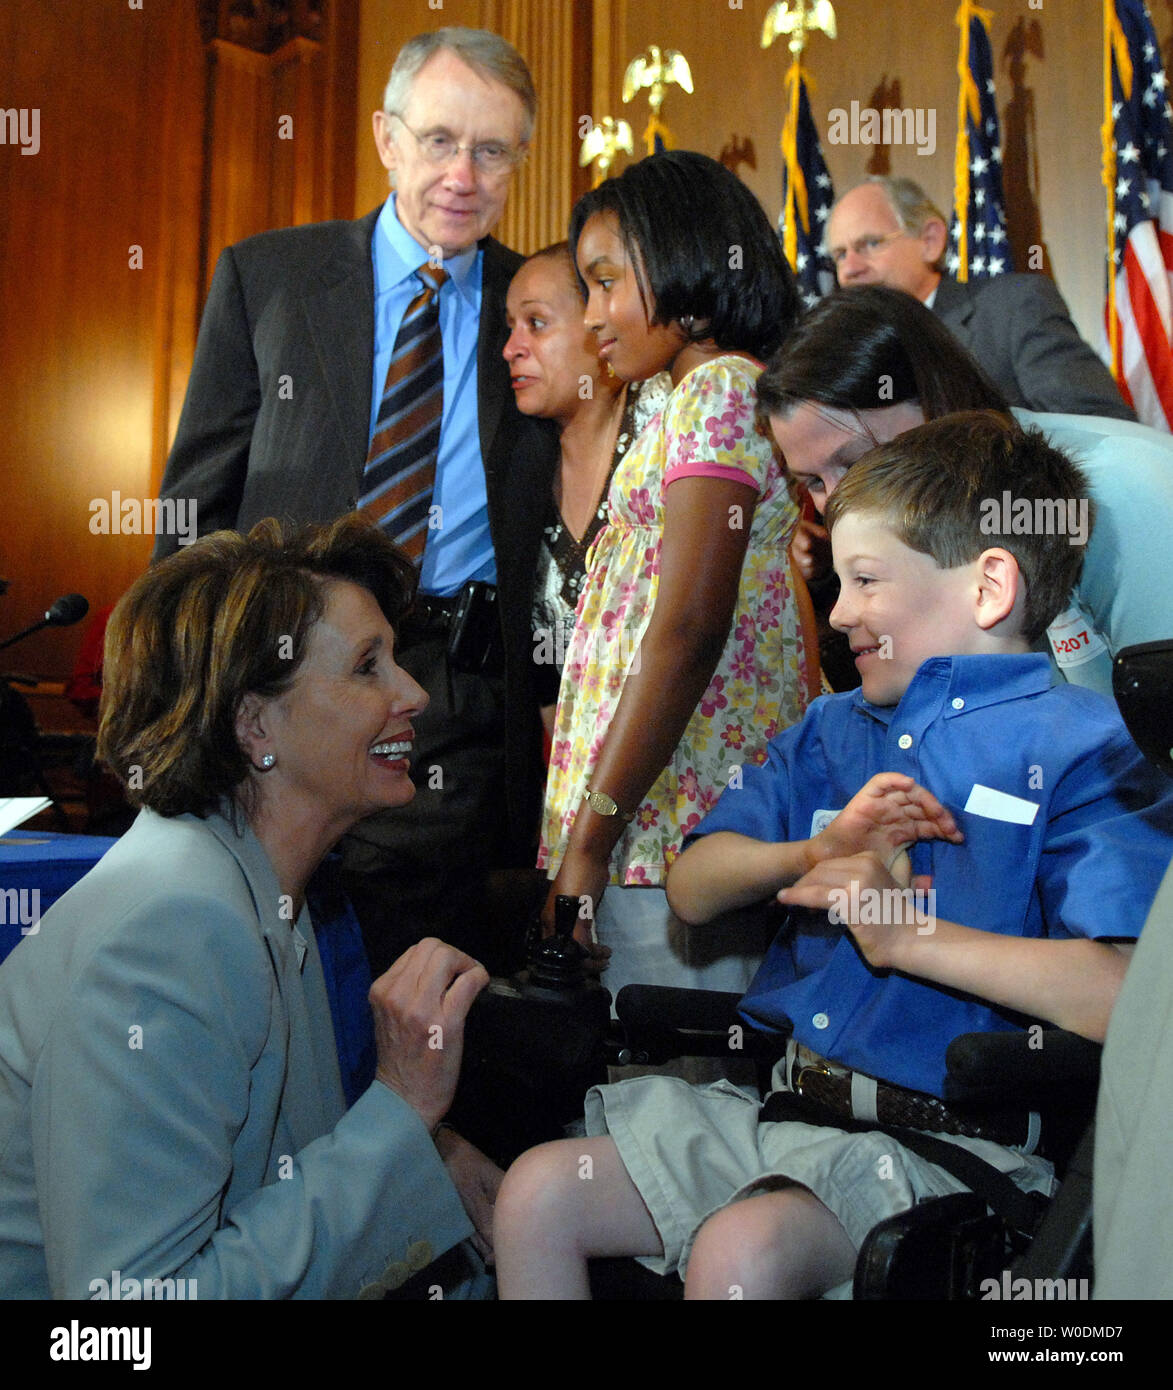 Speaker of the House Nancy Pelosi, D-CA, greets wheel-chair-bound Alex  Pitts, age 6 1/2 of Nazareth, Pennsylvania, and his mother Melissa Pitts  prior to a ceremony to send the embryonic stem cell